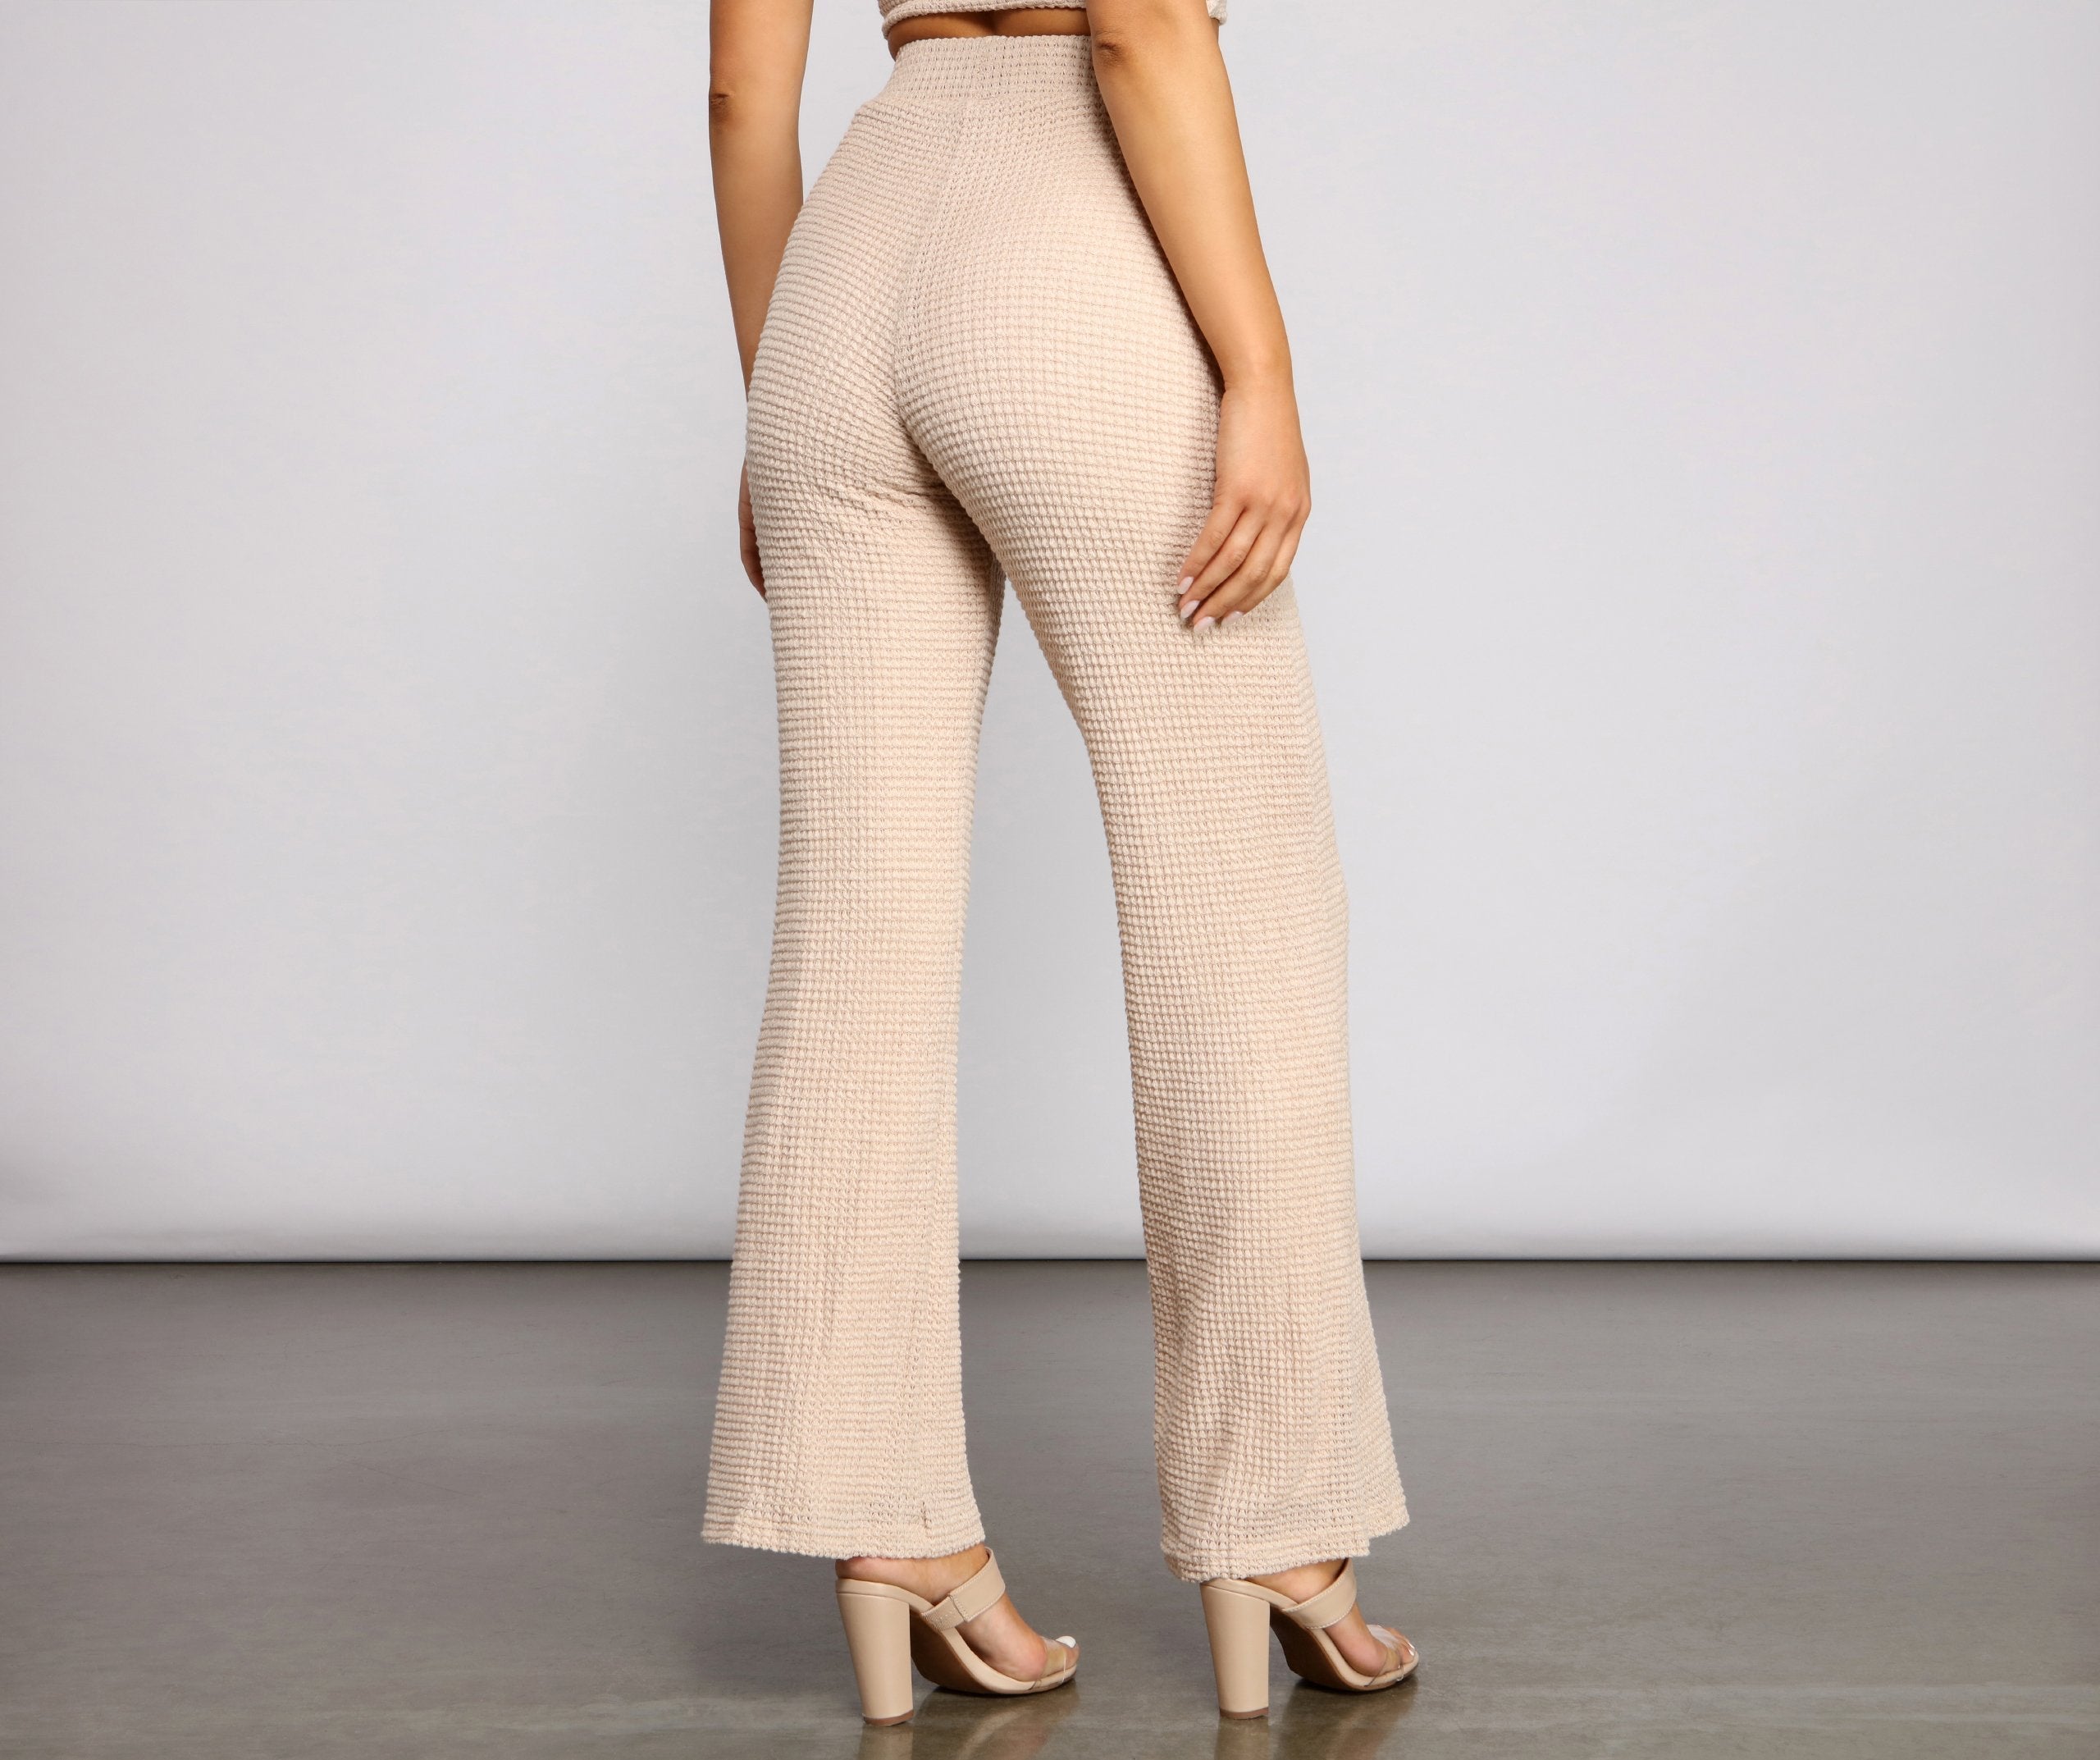 Trendy Textures High Waist Pants - Lady Occasions